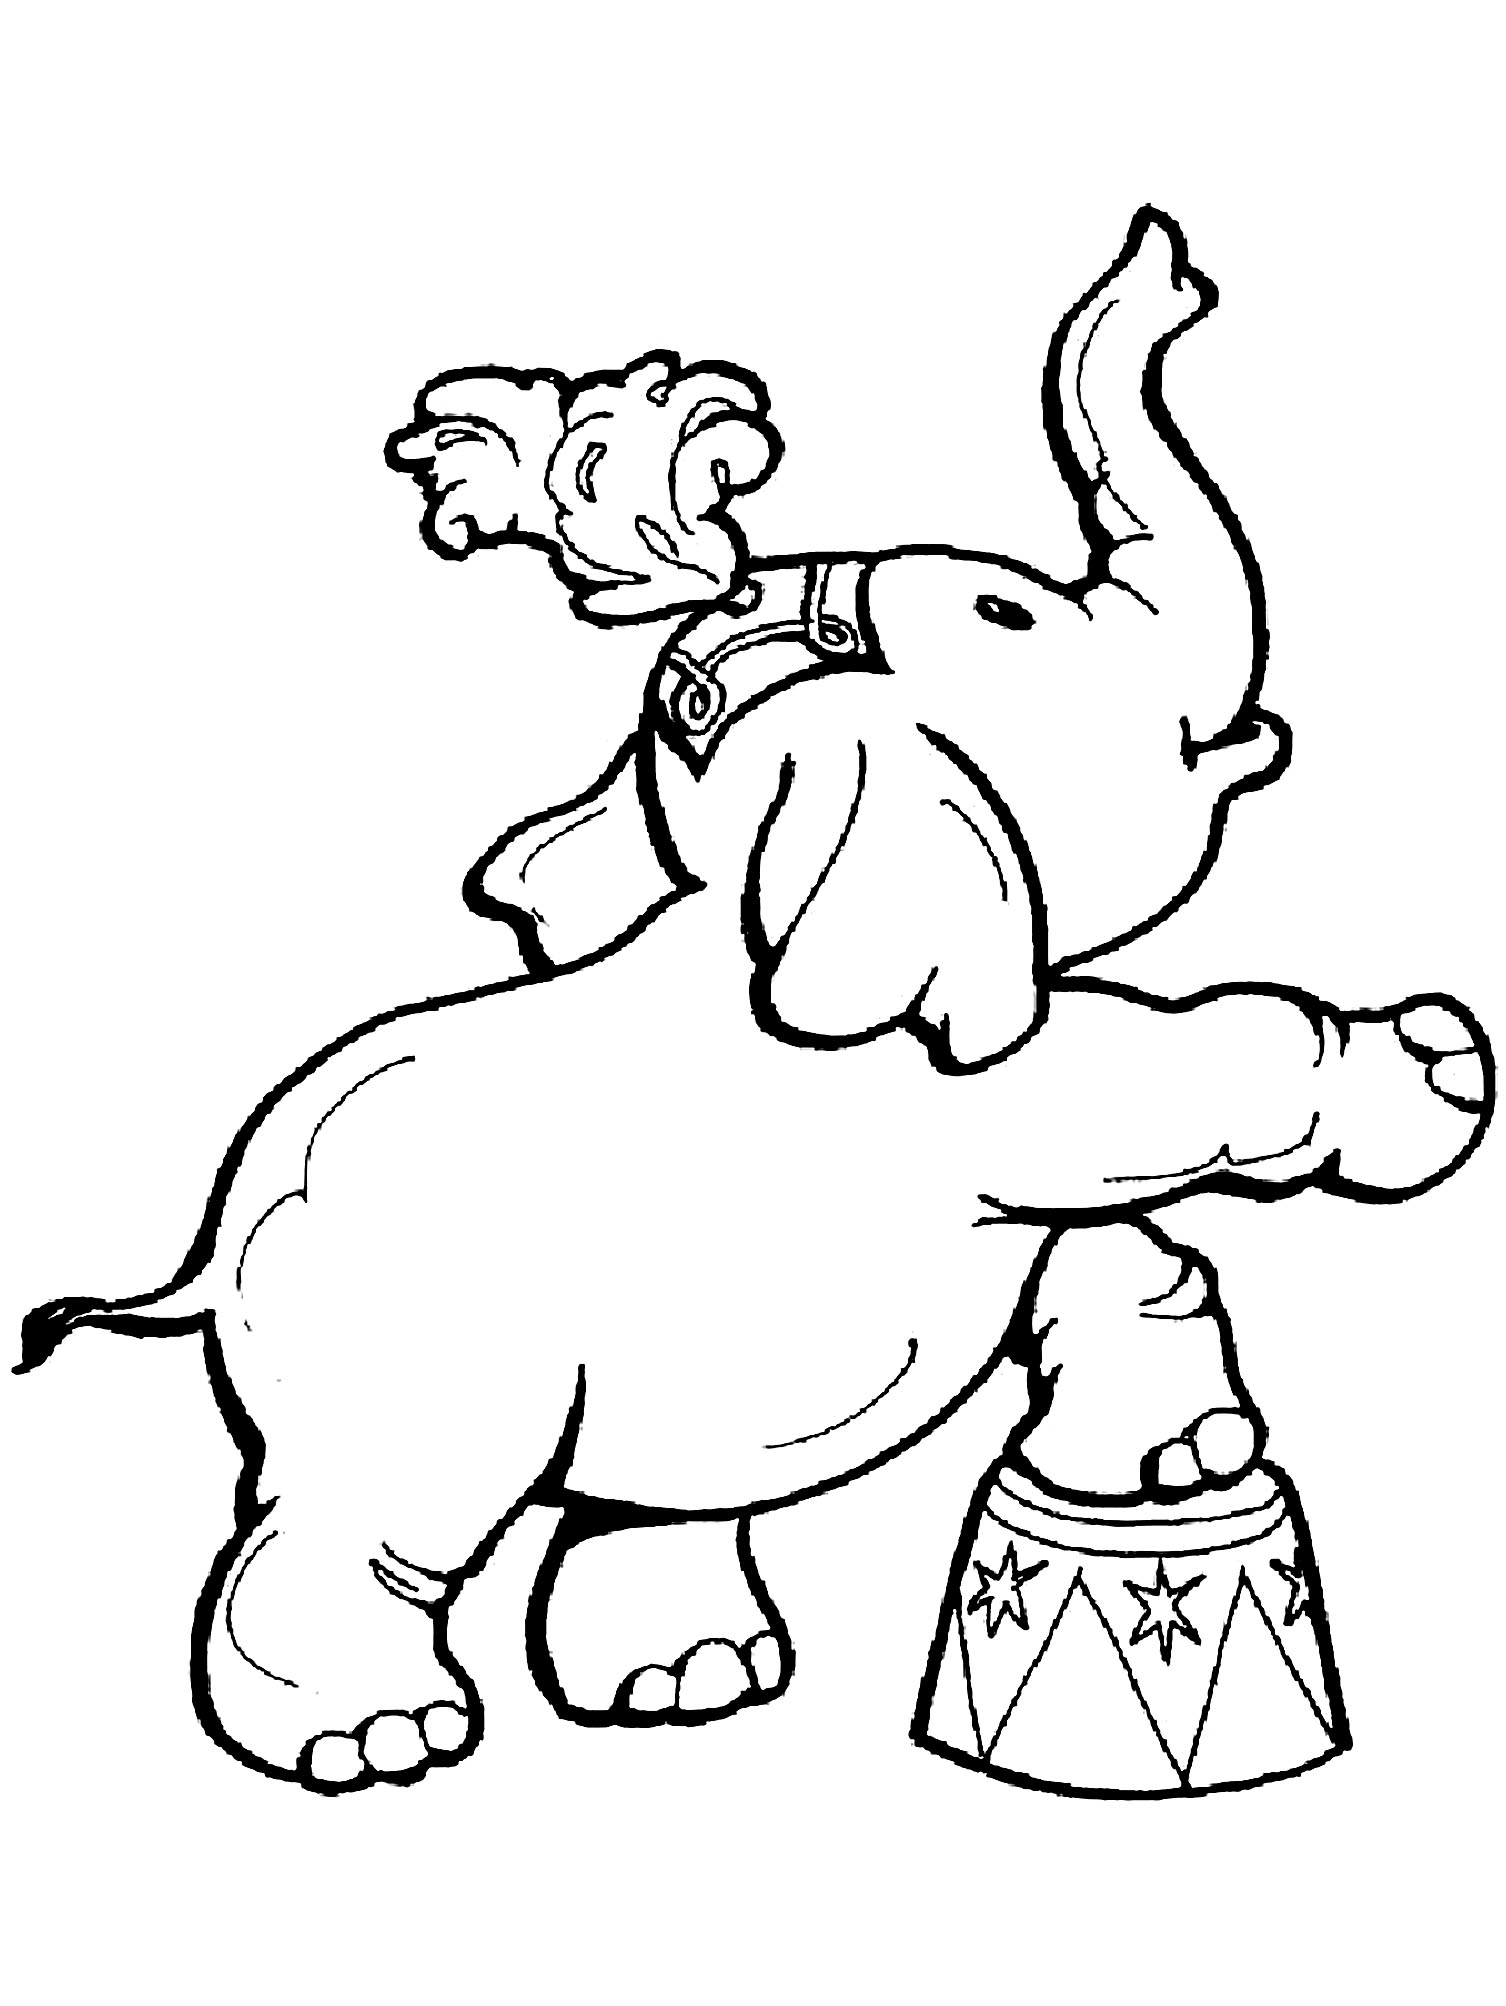 Free Circus Coloring Pages To Color Circus Kids Coloring Pages